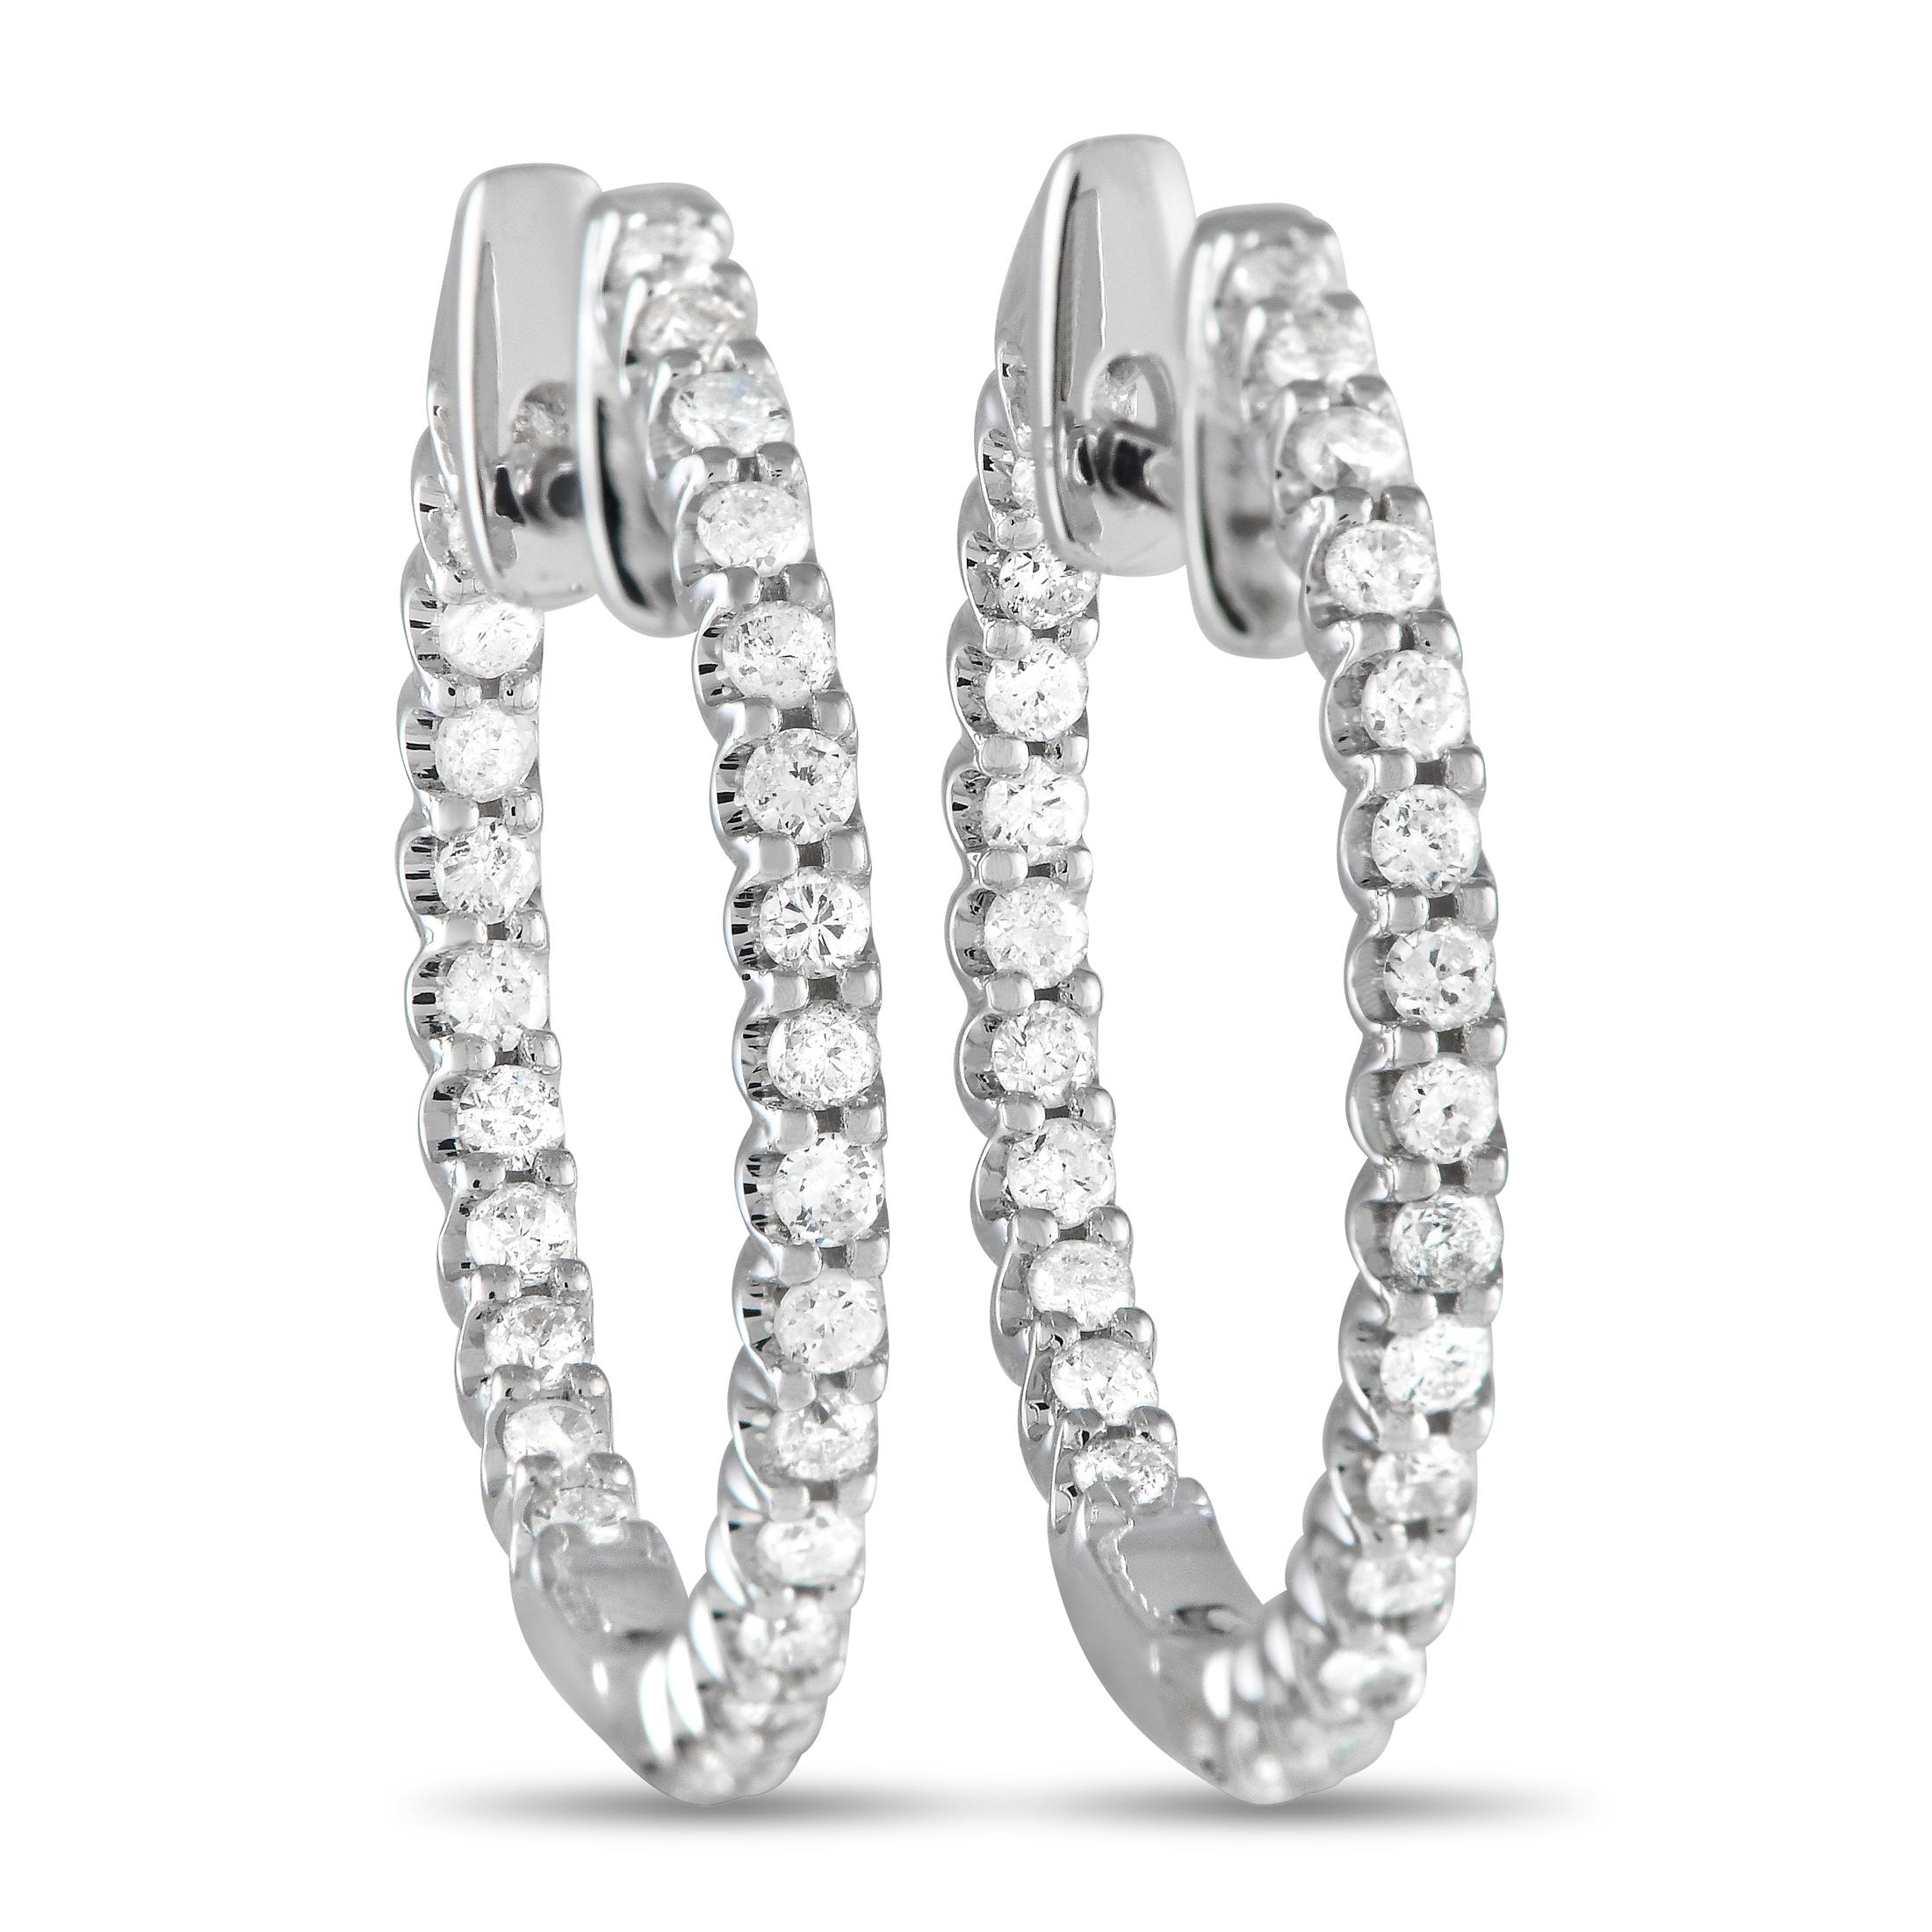 Lb Exclusive 14k White Gold 0.42 Carat Diamond Inside-Out Hoop Earrings In New Condition For Sale In Southampton, PA